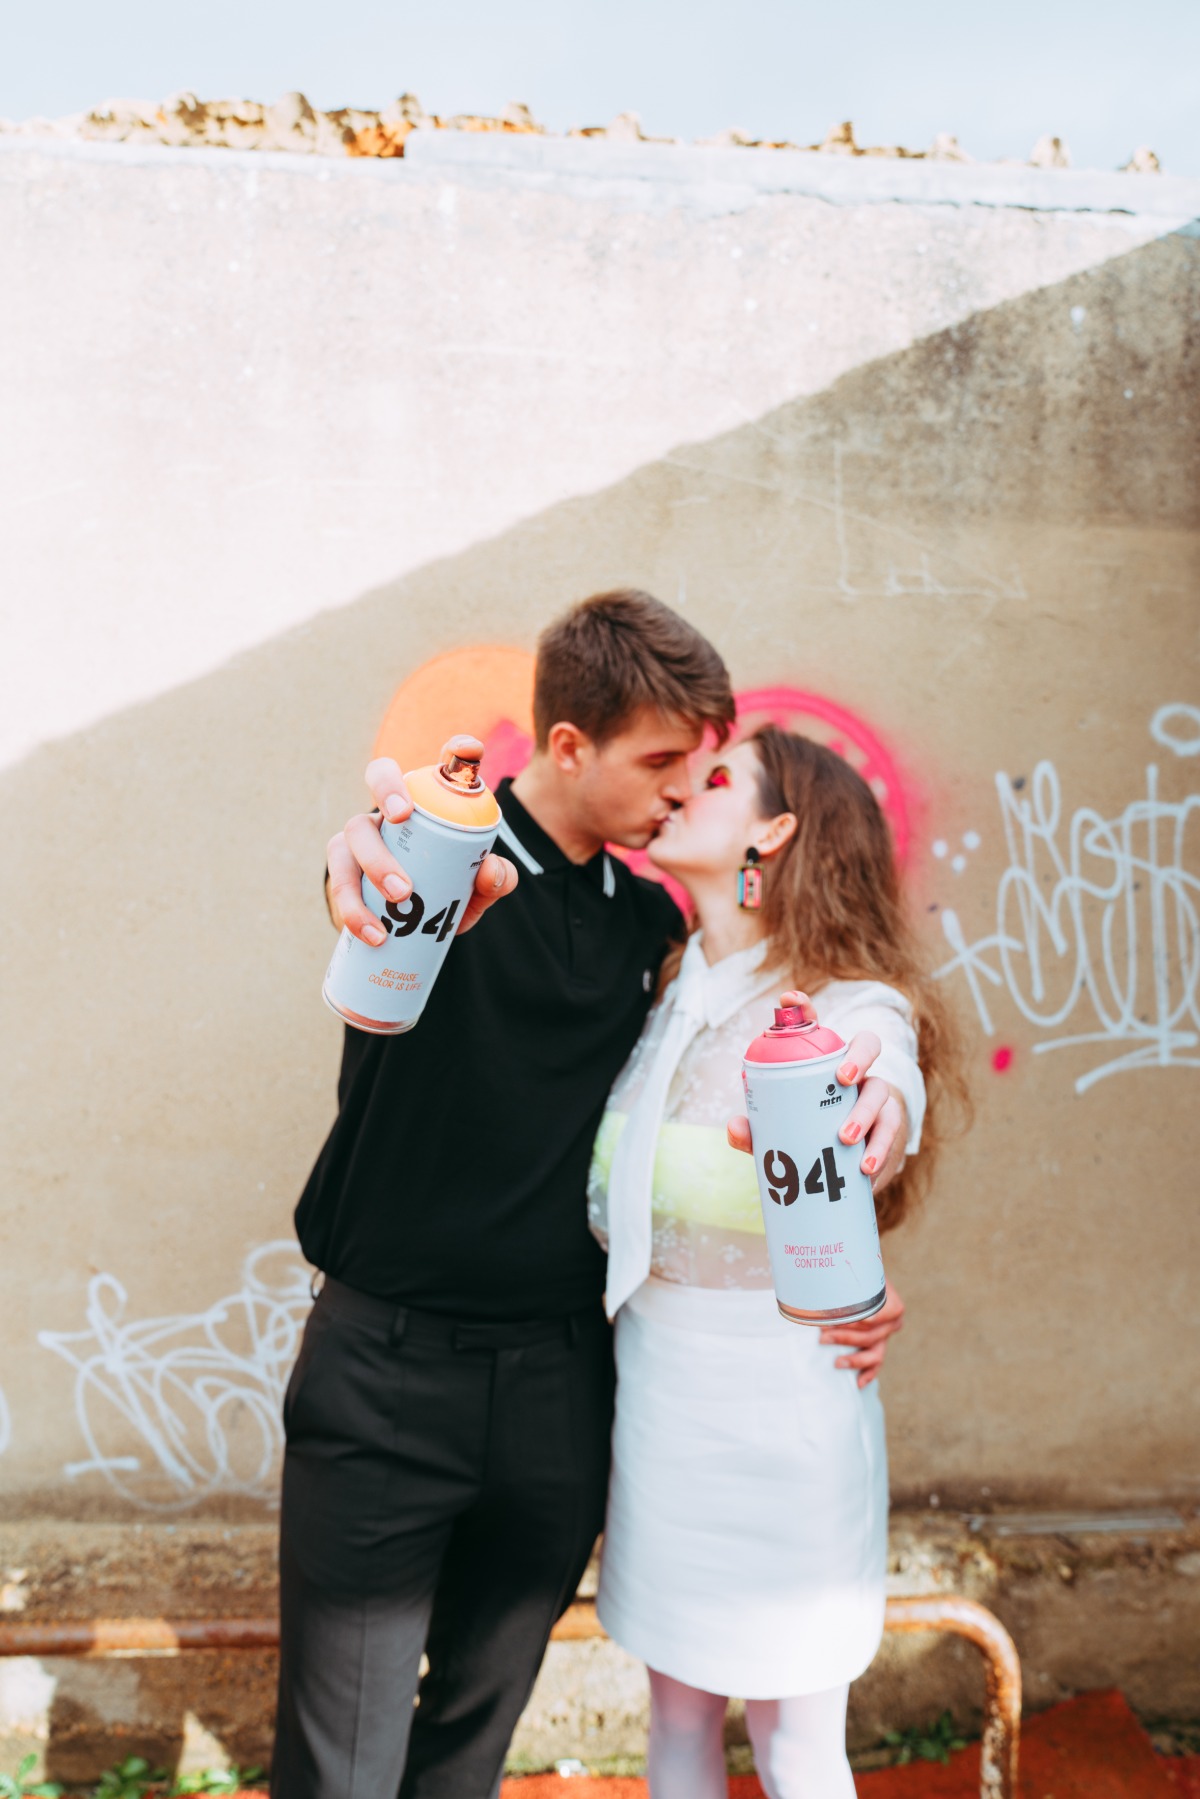 Styled Shoot At A Skate Park That Will Melt Your 90s-Lovin